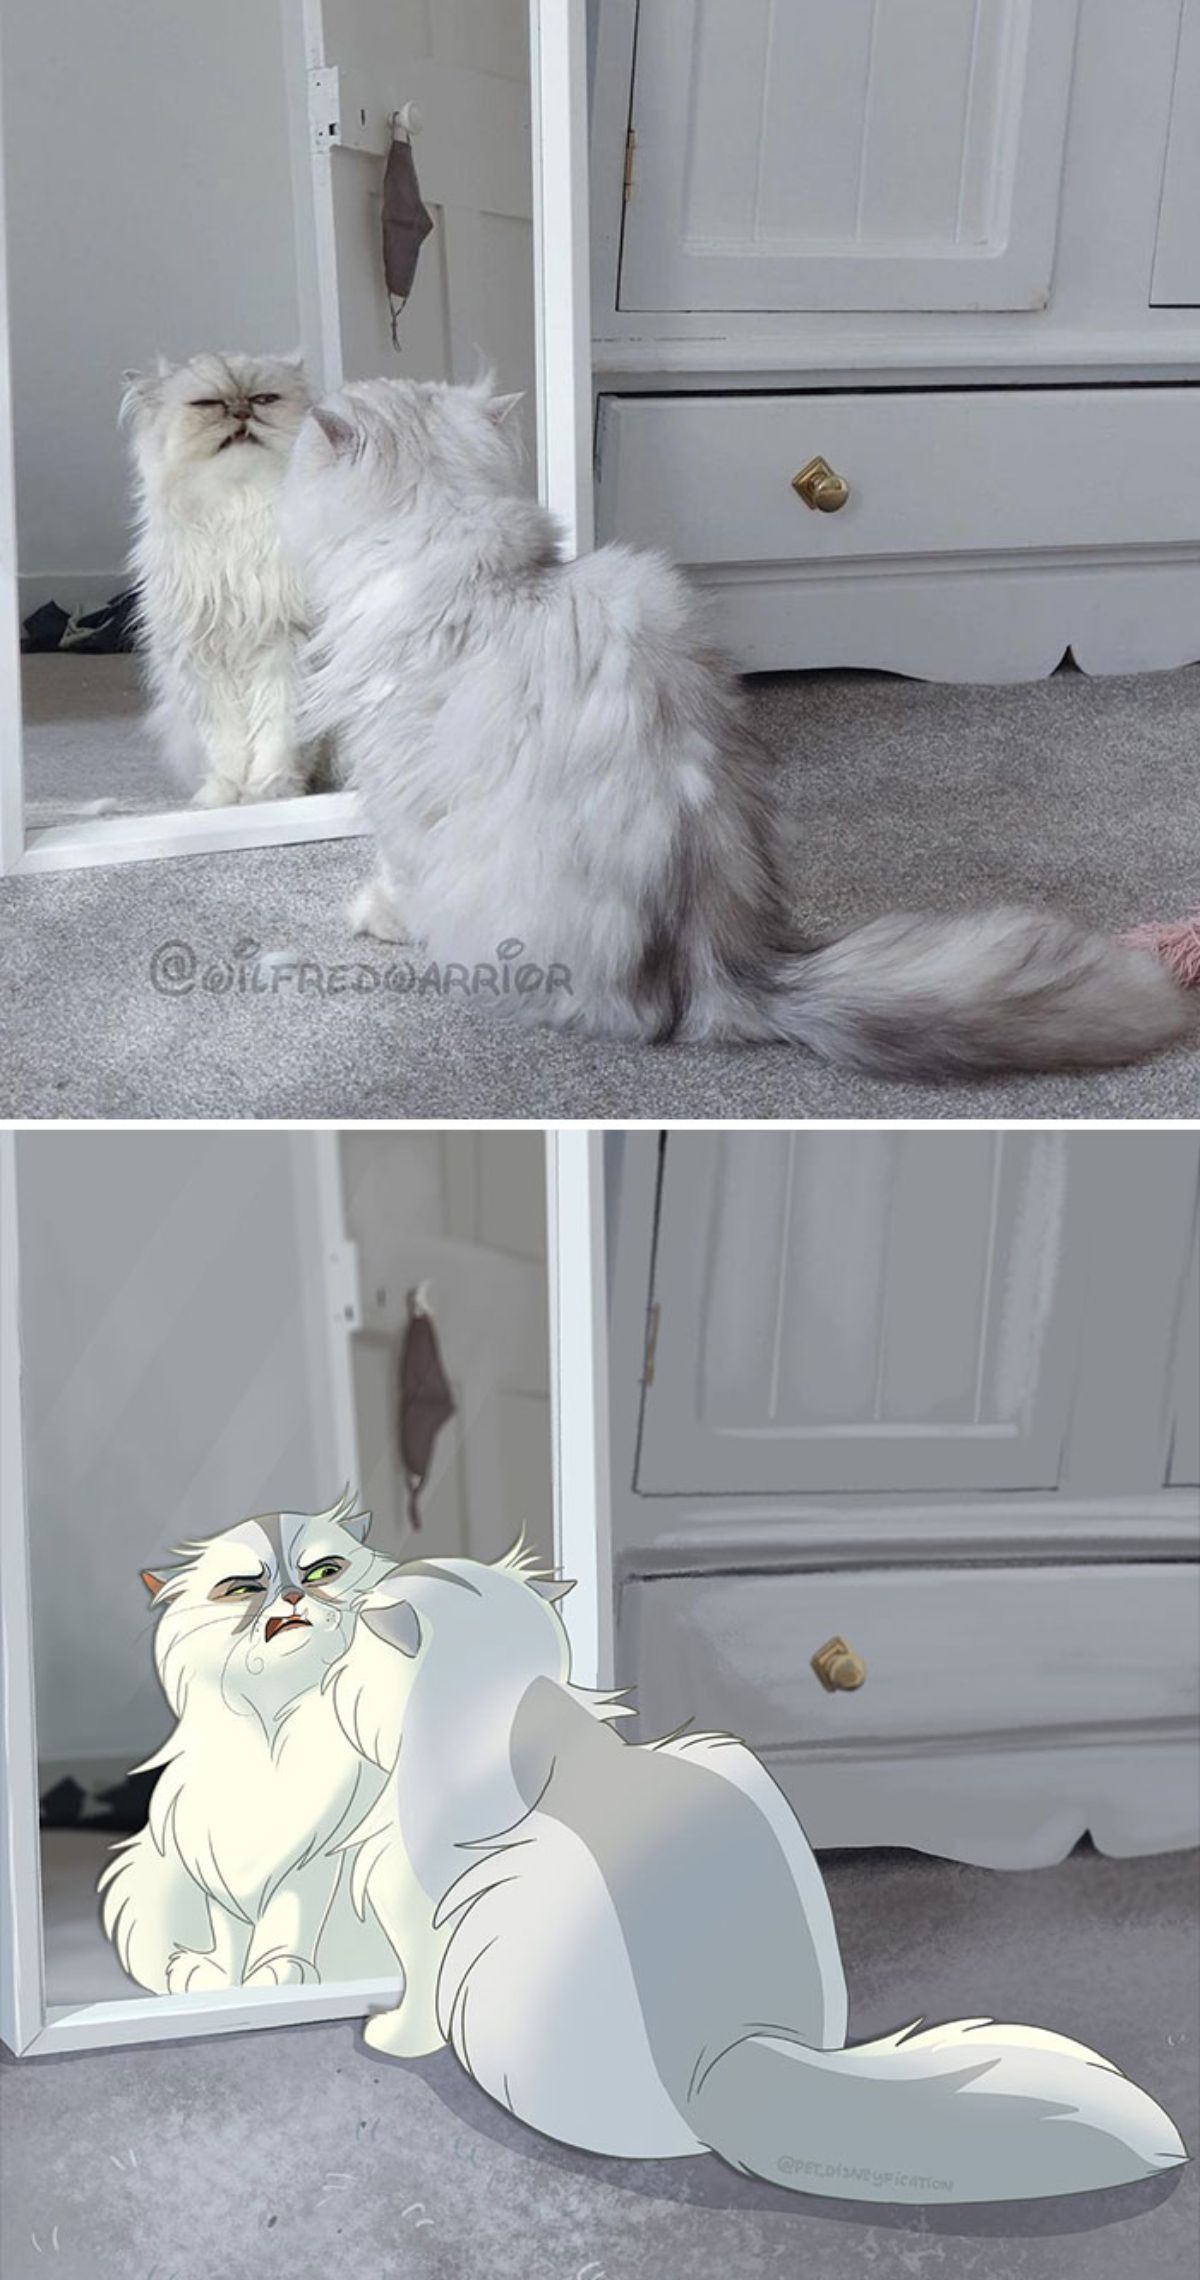 real photo and cartoon image of a fluffy white cat looking in a large mirror